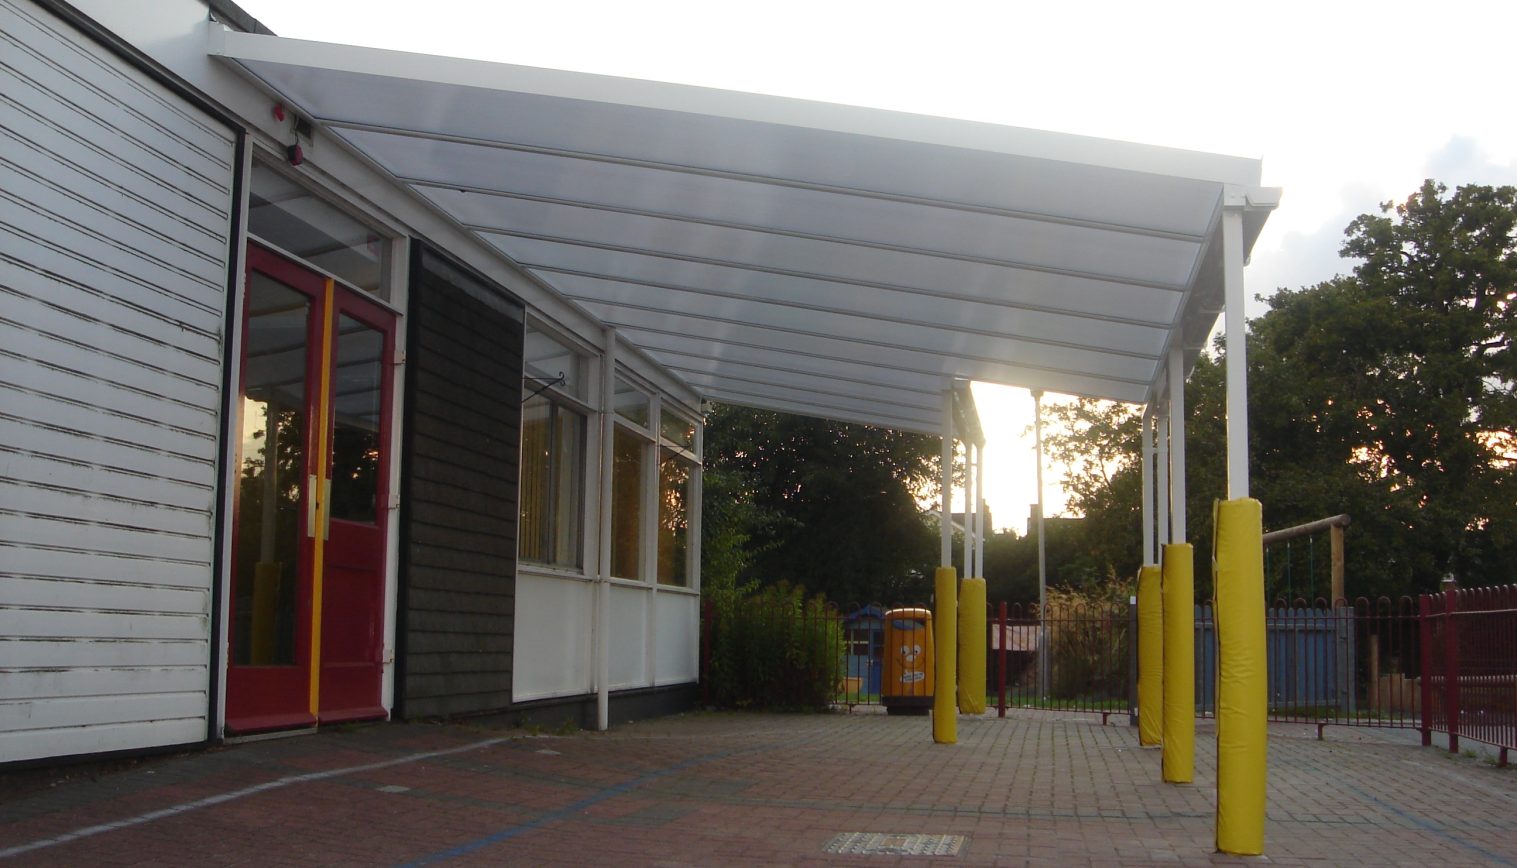 Perryfield Infant School – Wall Mounted Canopy